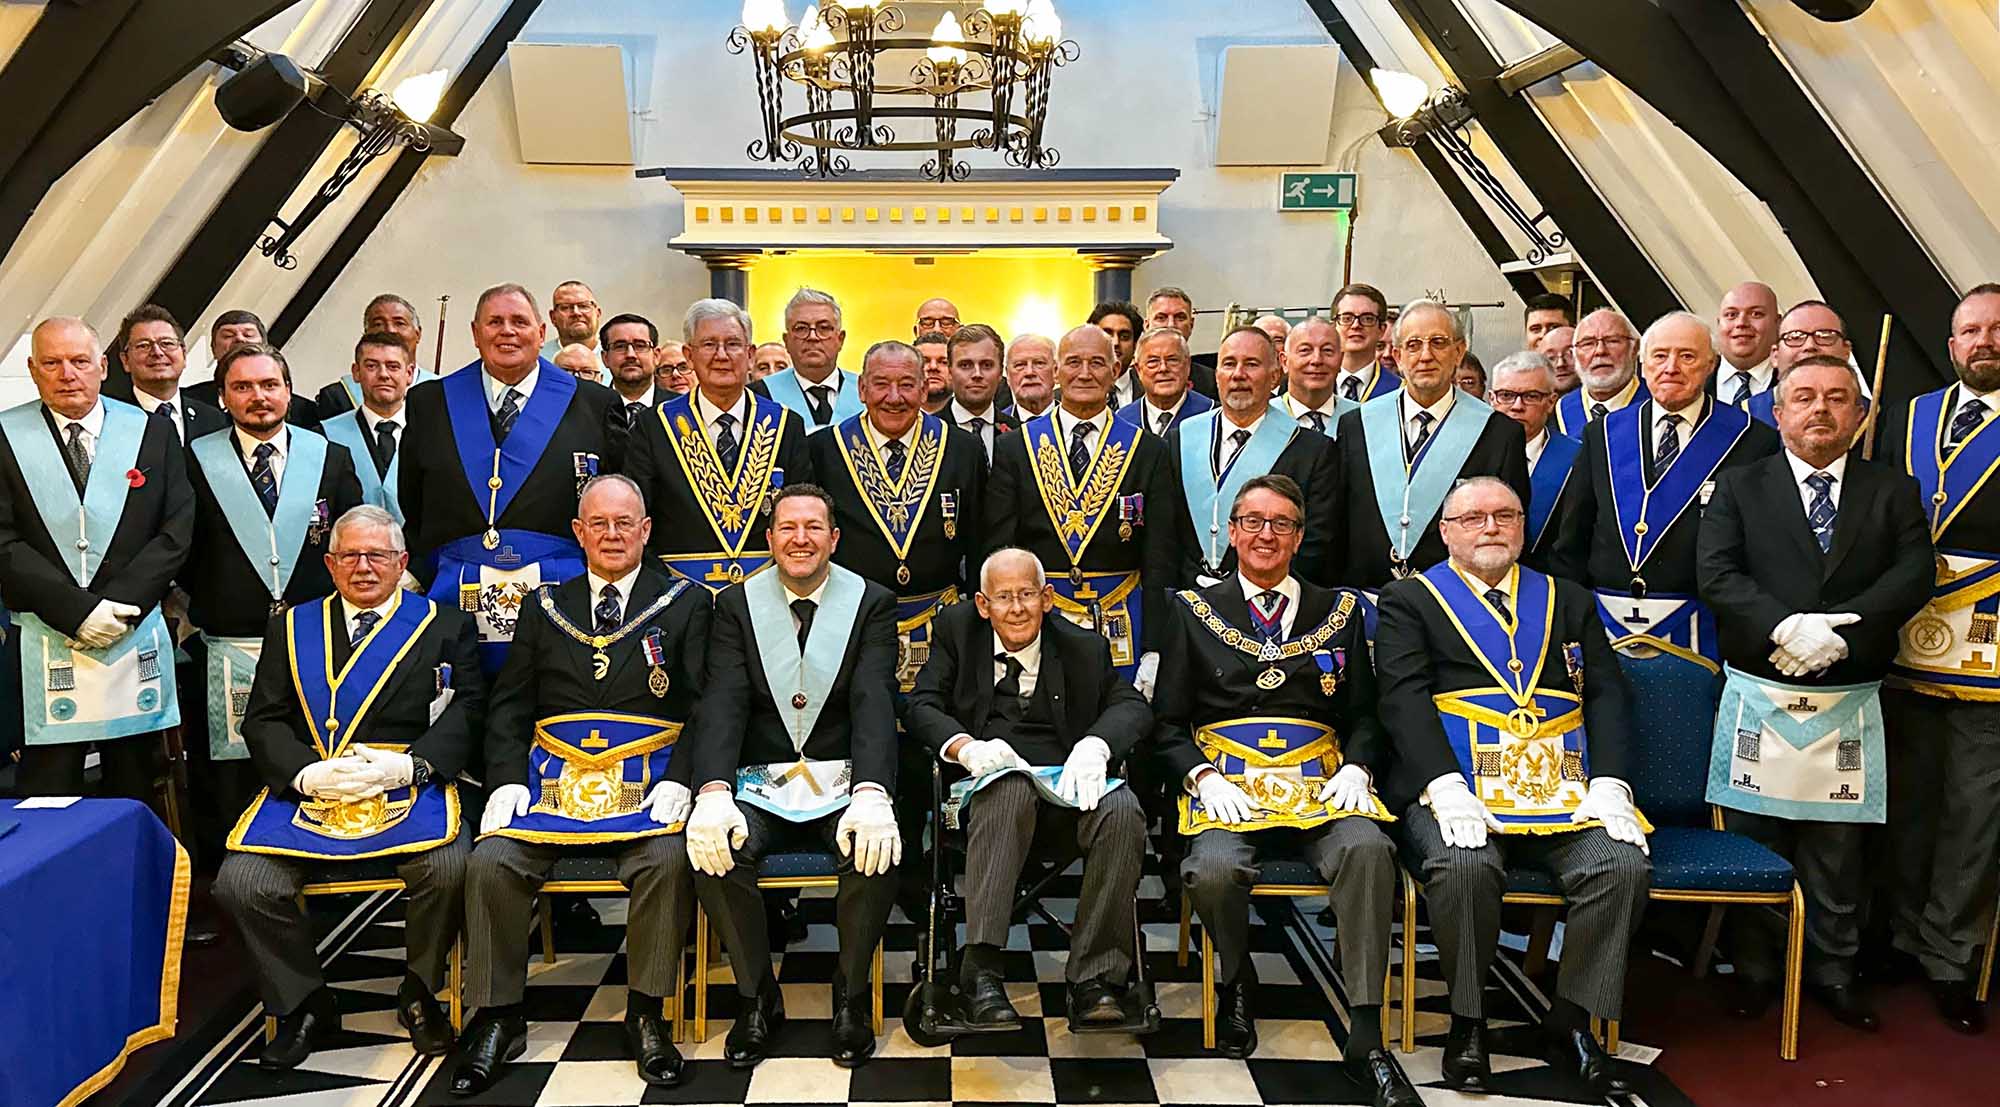 Charles is seated in the centre of a large group of freemasons wearing full regalia